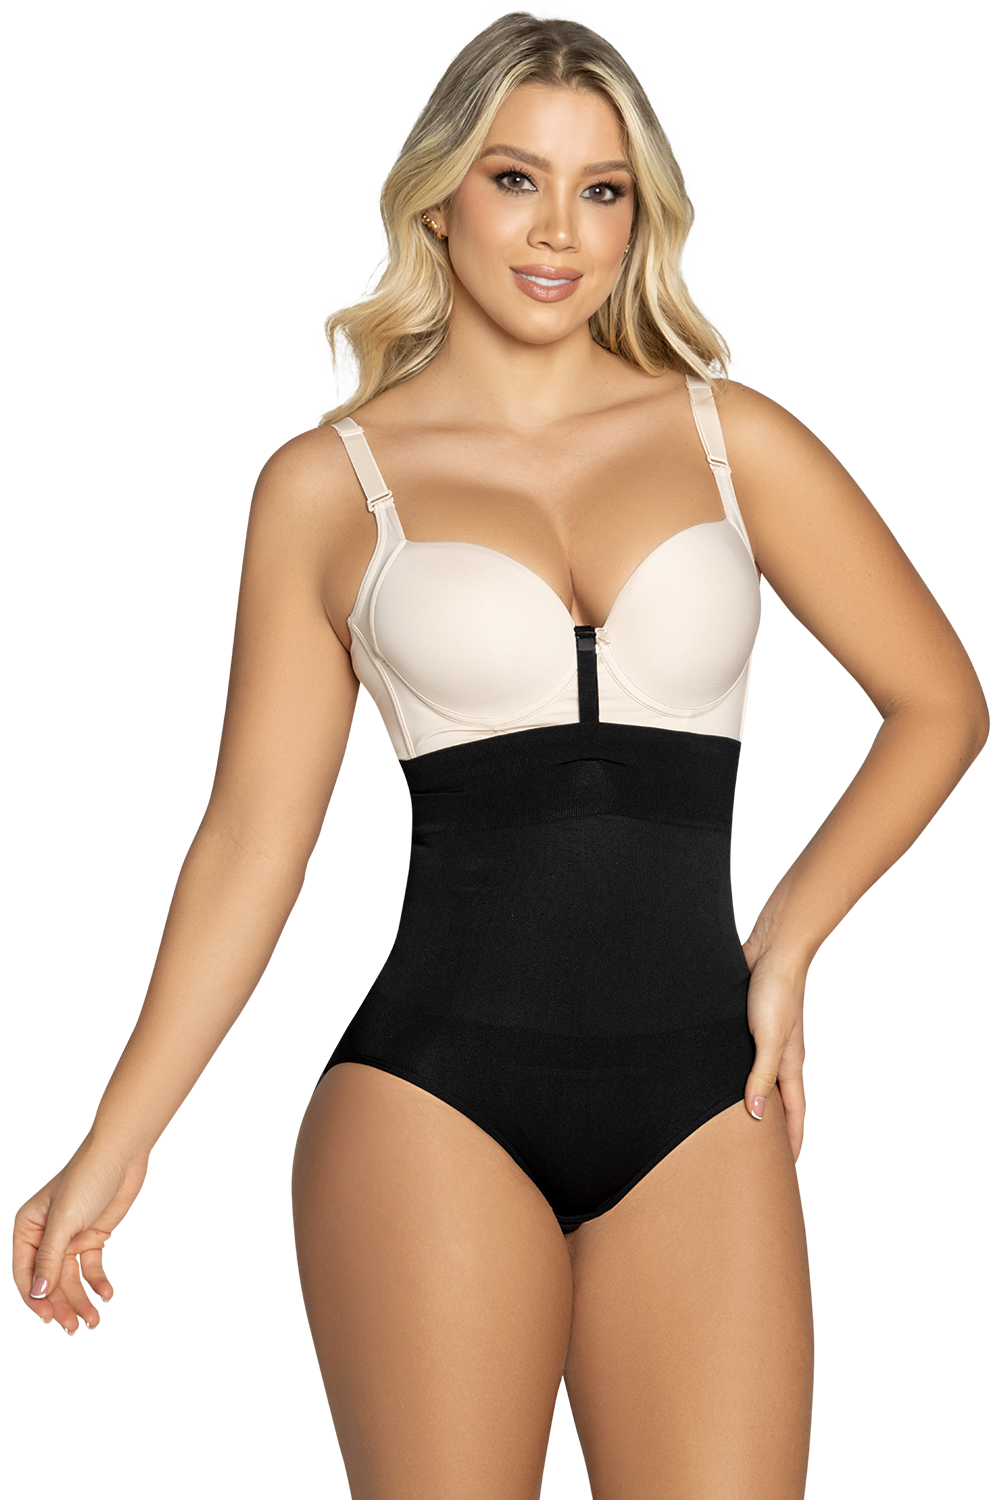 Collections Colombian Girdles Panty Body Shape Strapless Jackie London